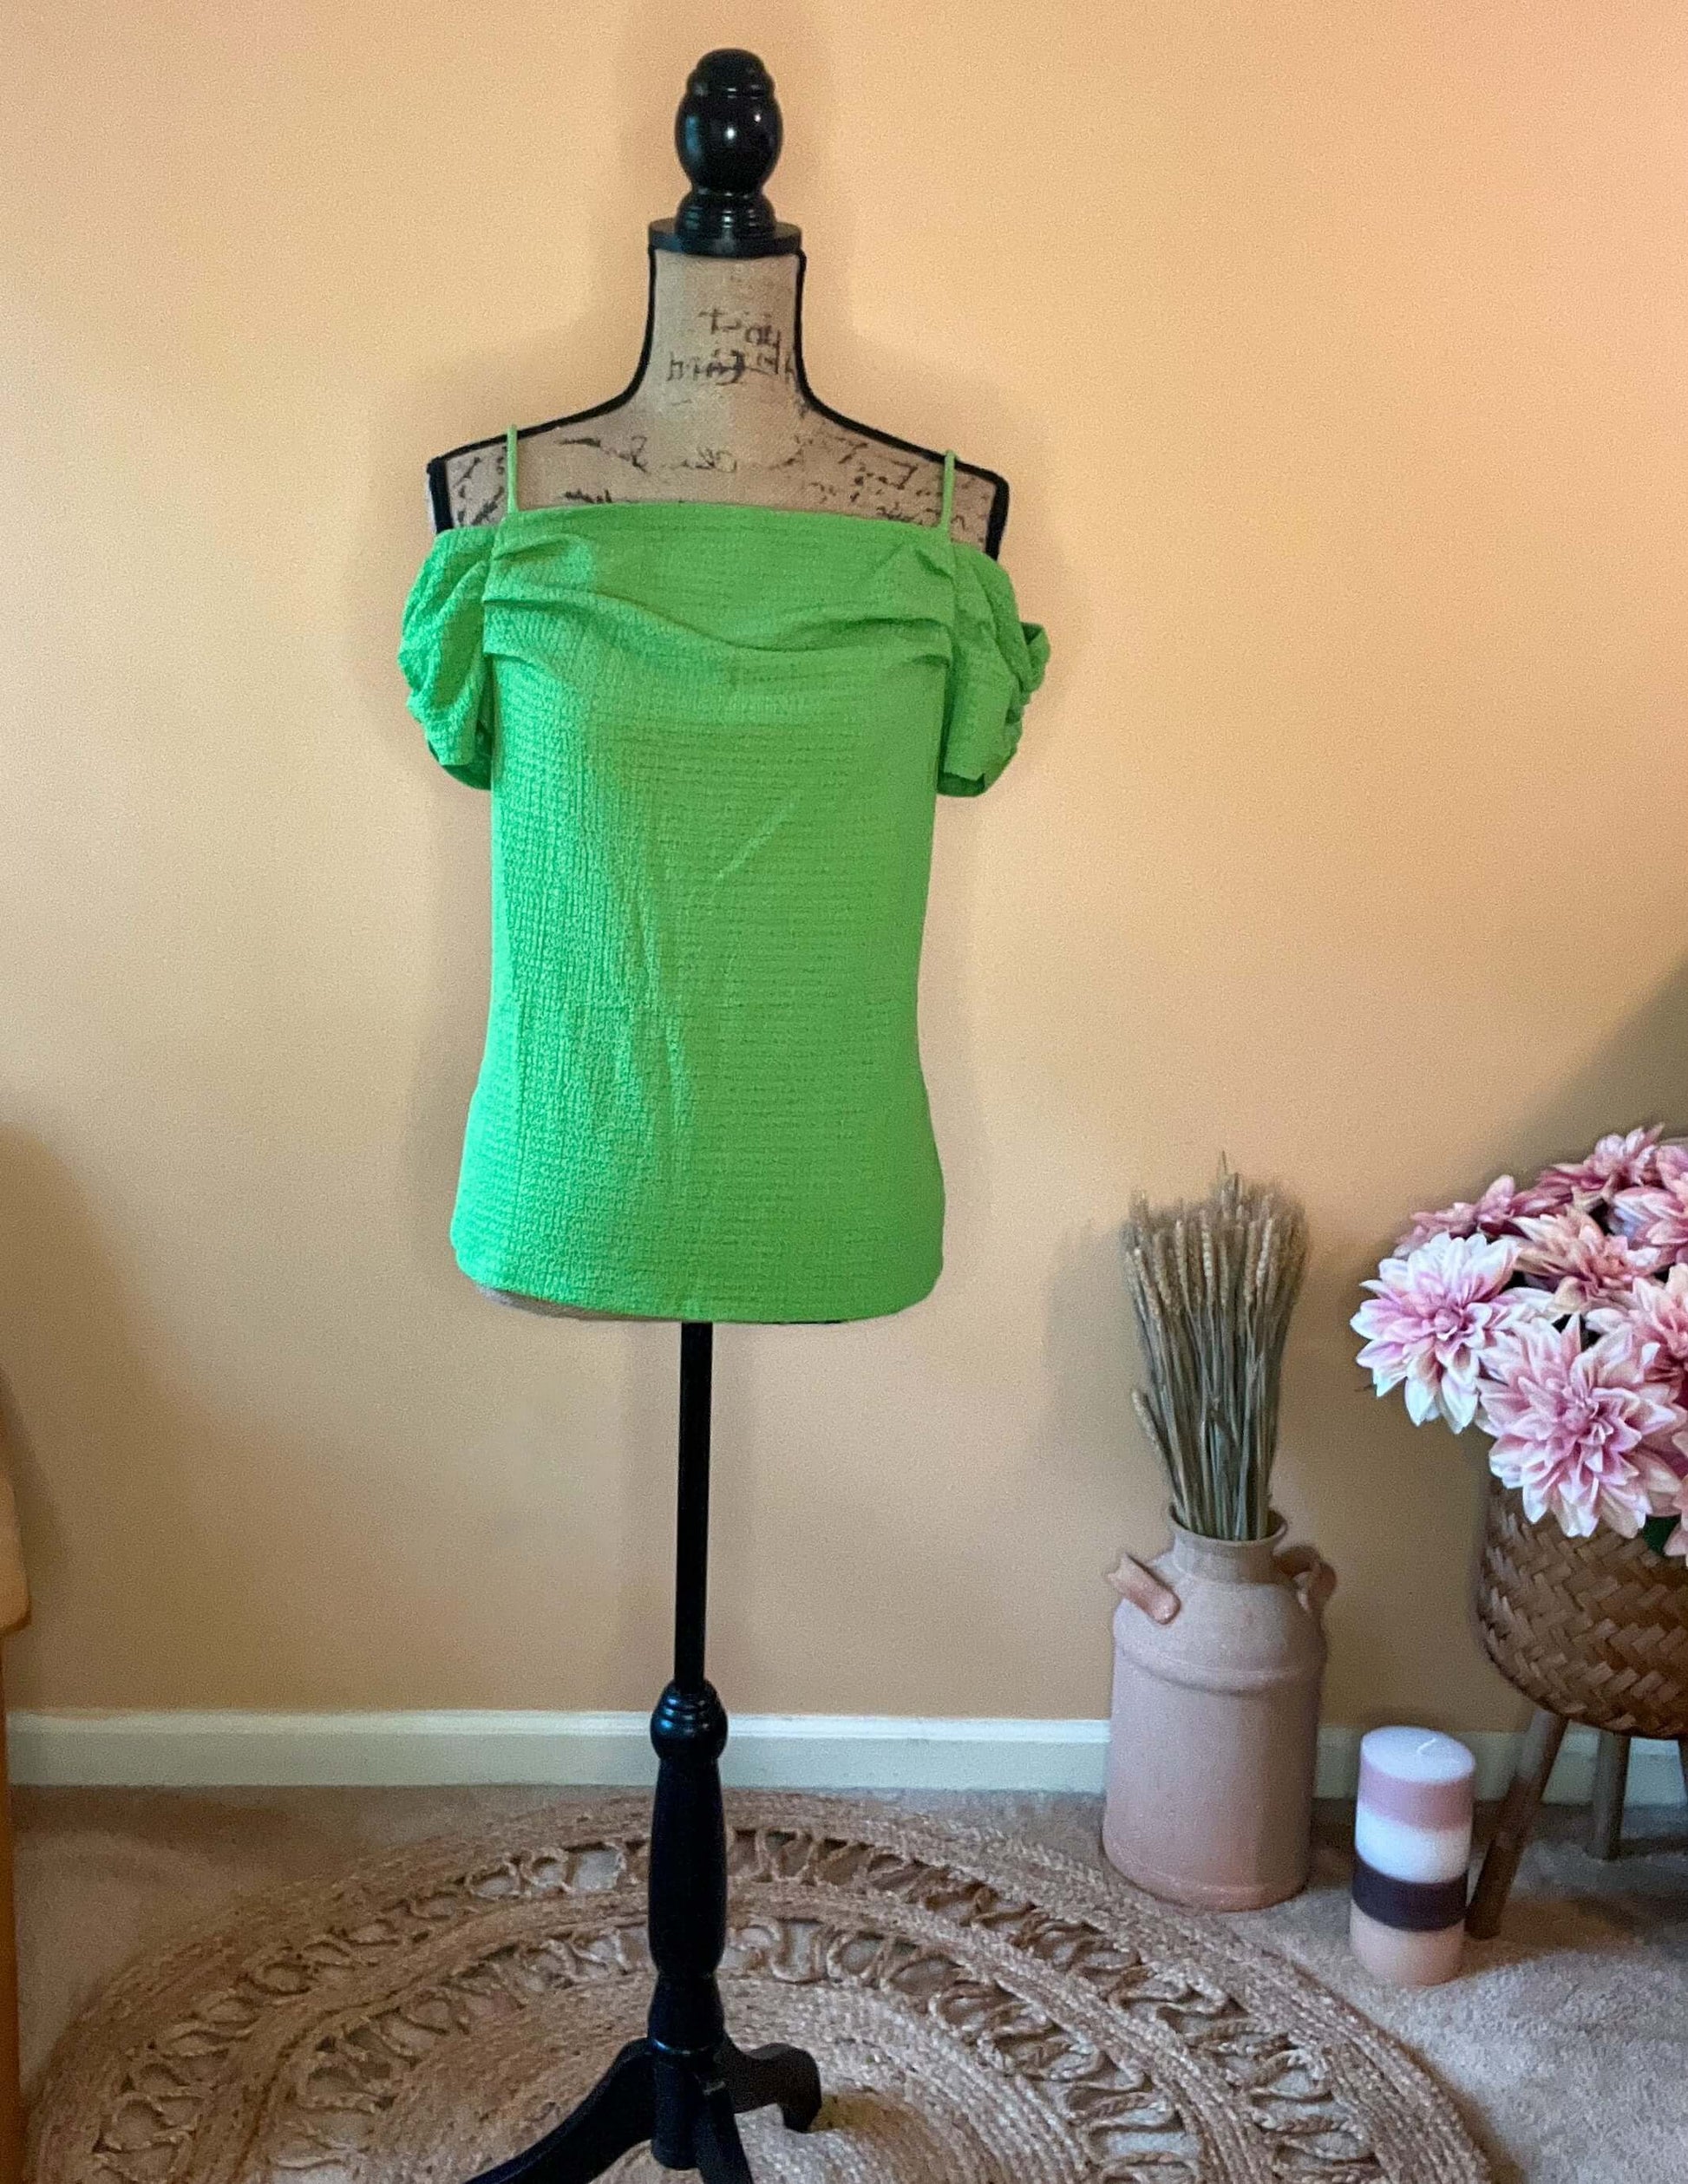 Short Sleeves clothing, cold shoulder top, cold shoulder top with adjustable straps, shirts, shirts & tops Size: Small, Medium, Large, XL